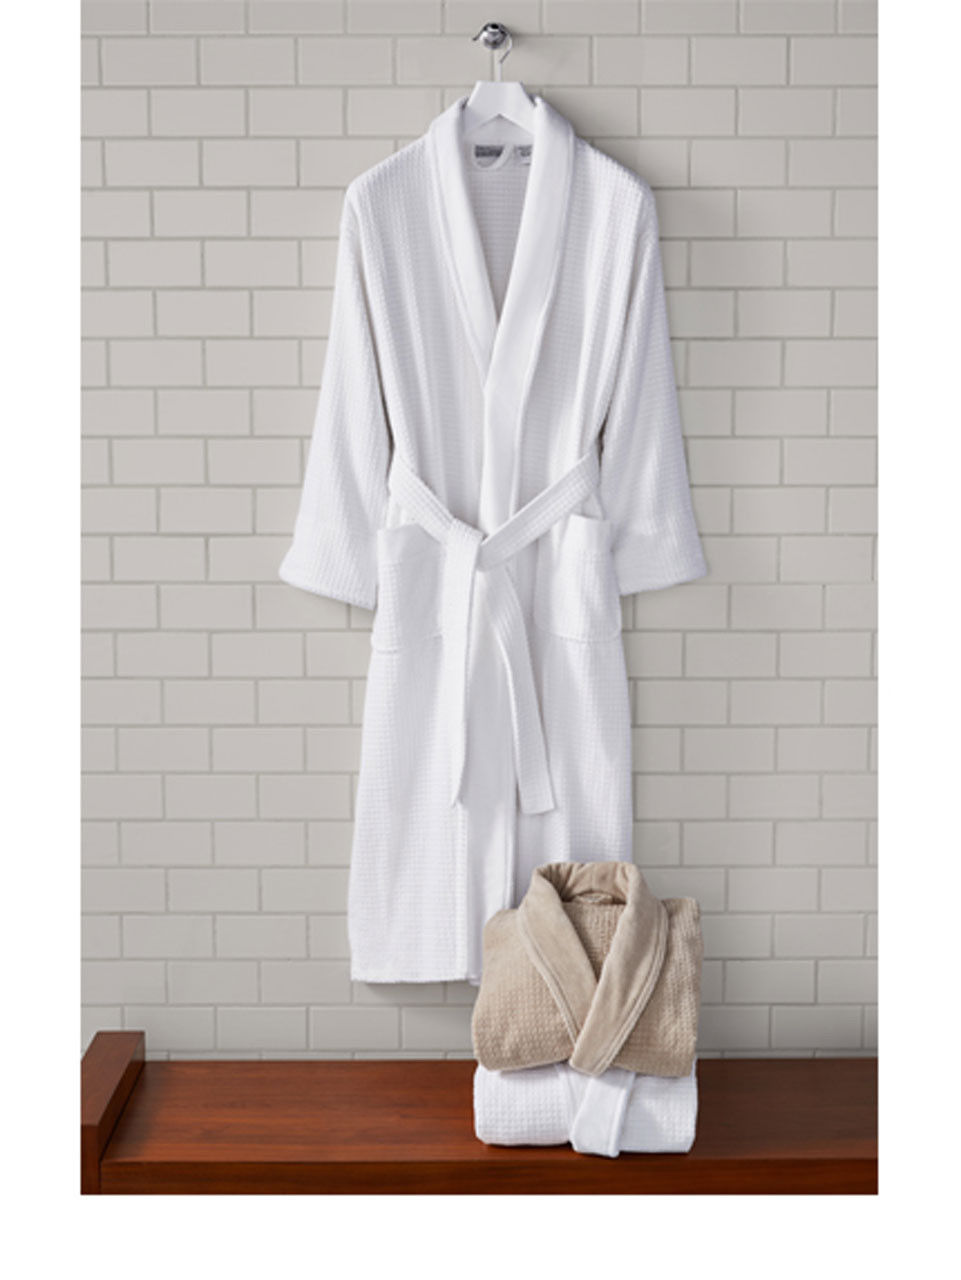 Is the 1concier robe styled like the Platinum Shawl Collar Robe?